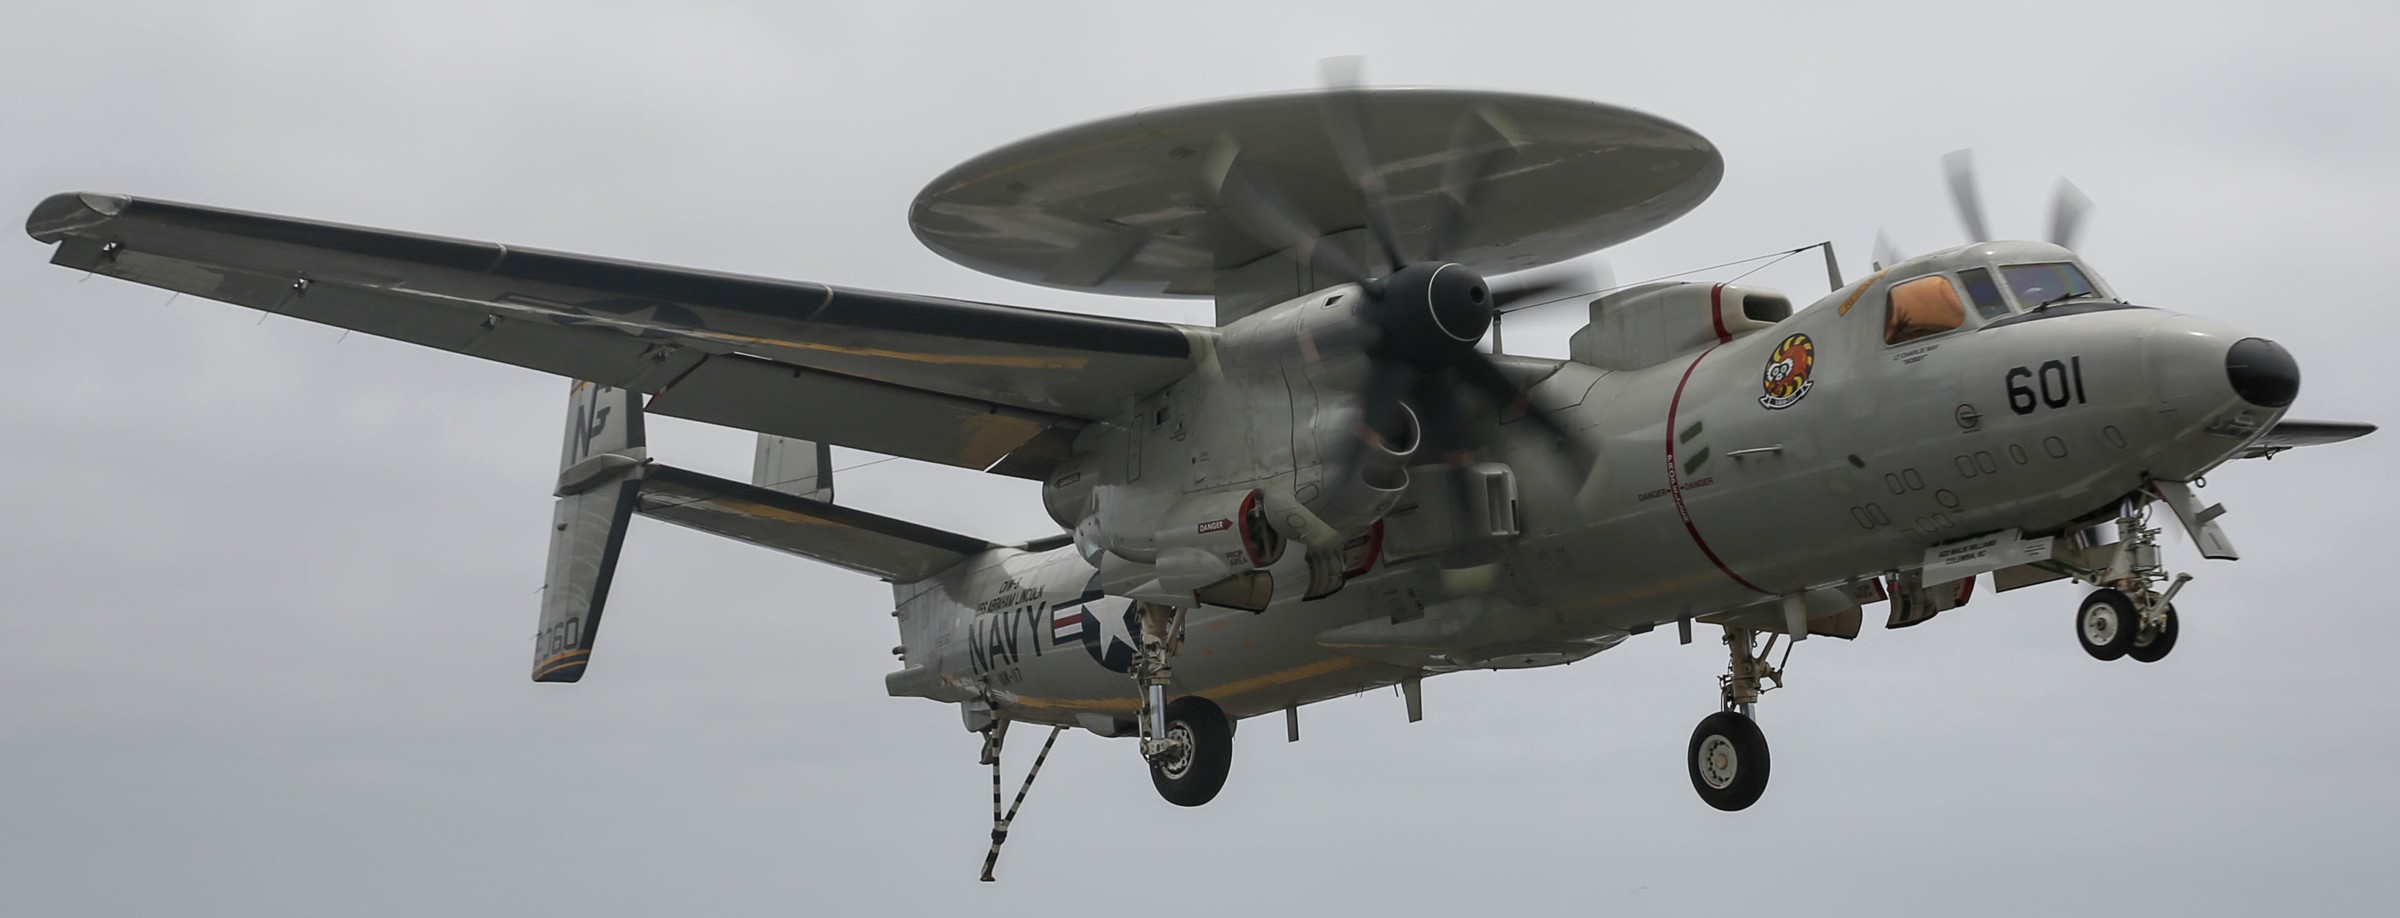 vaw-117 wallbangers airborne command and control squadron navy e-2d hawkeye cvw-9 uss abraham lincoln cvn-72 37